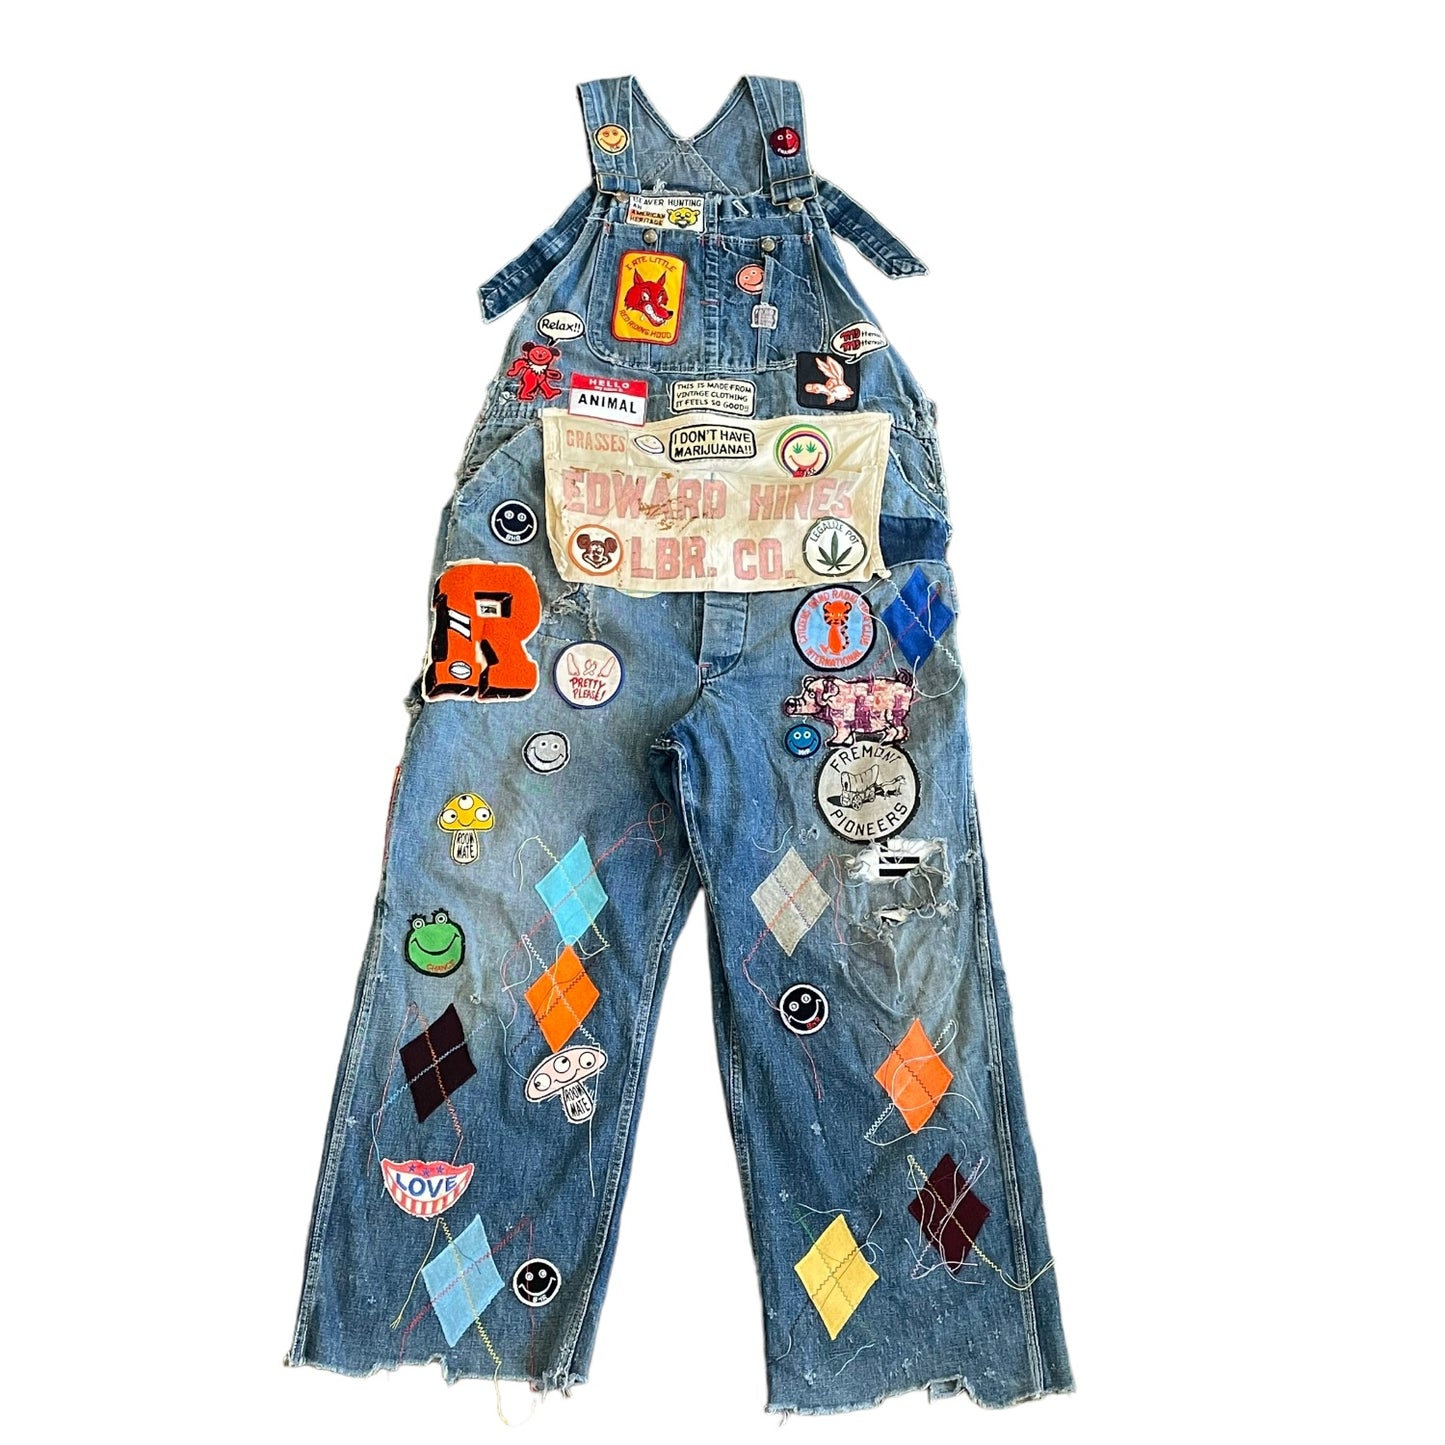 ALM original recycled vintage distressed overall Pay Day